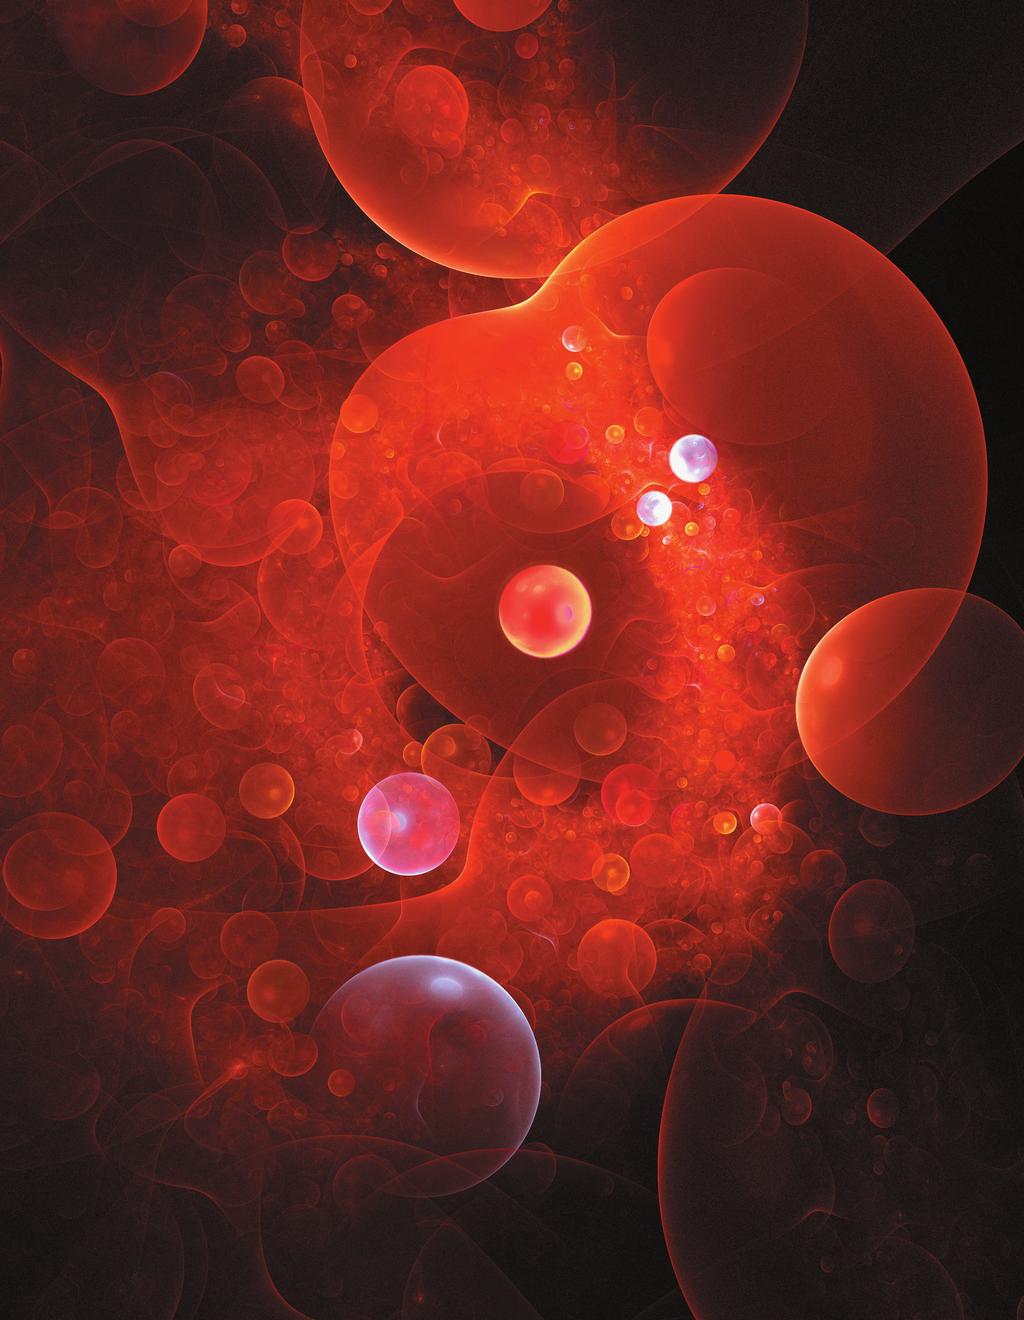 OPINION REGENERATIVE MEDICINE PRP is a growing autologous and point-of-care treatment